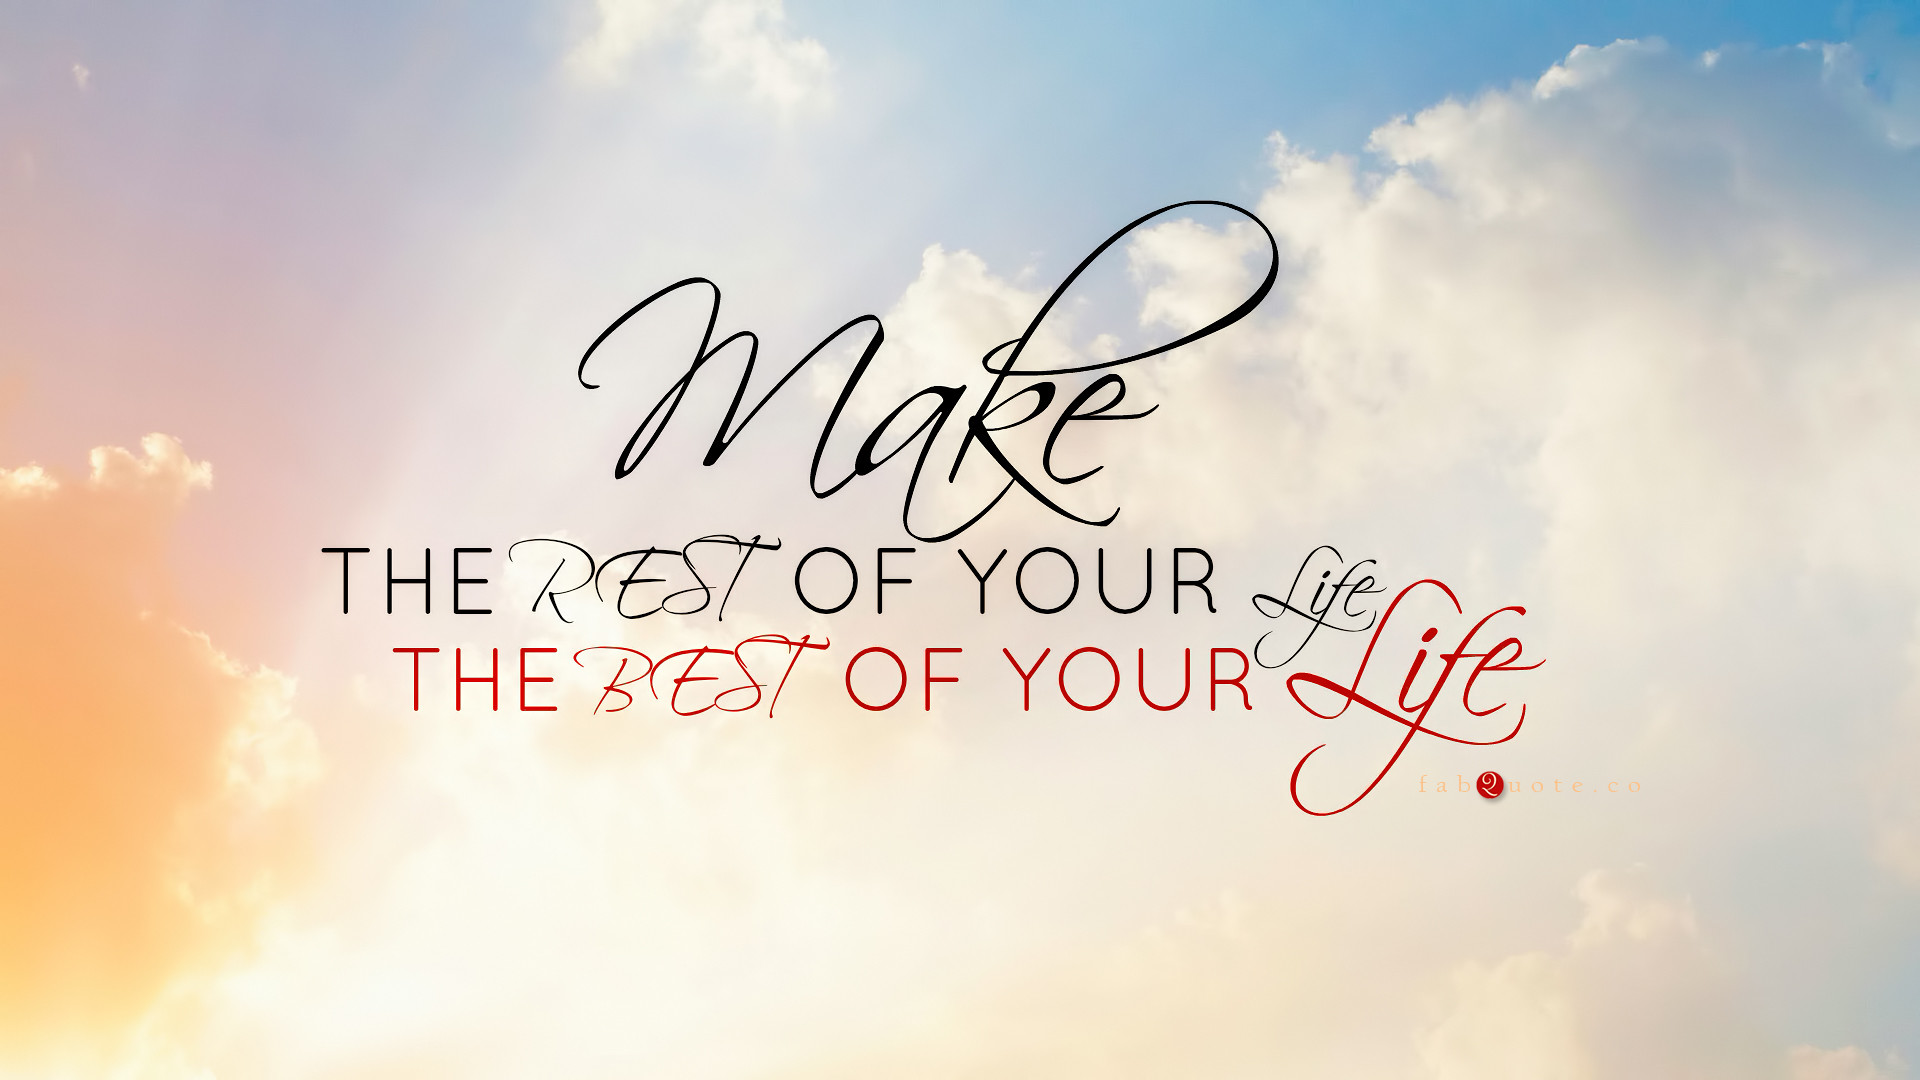 1920x1080 Make the rest of your life, the best of your life wallpaper